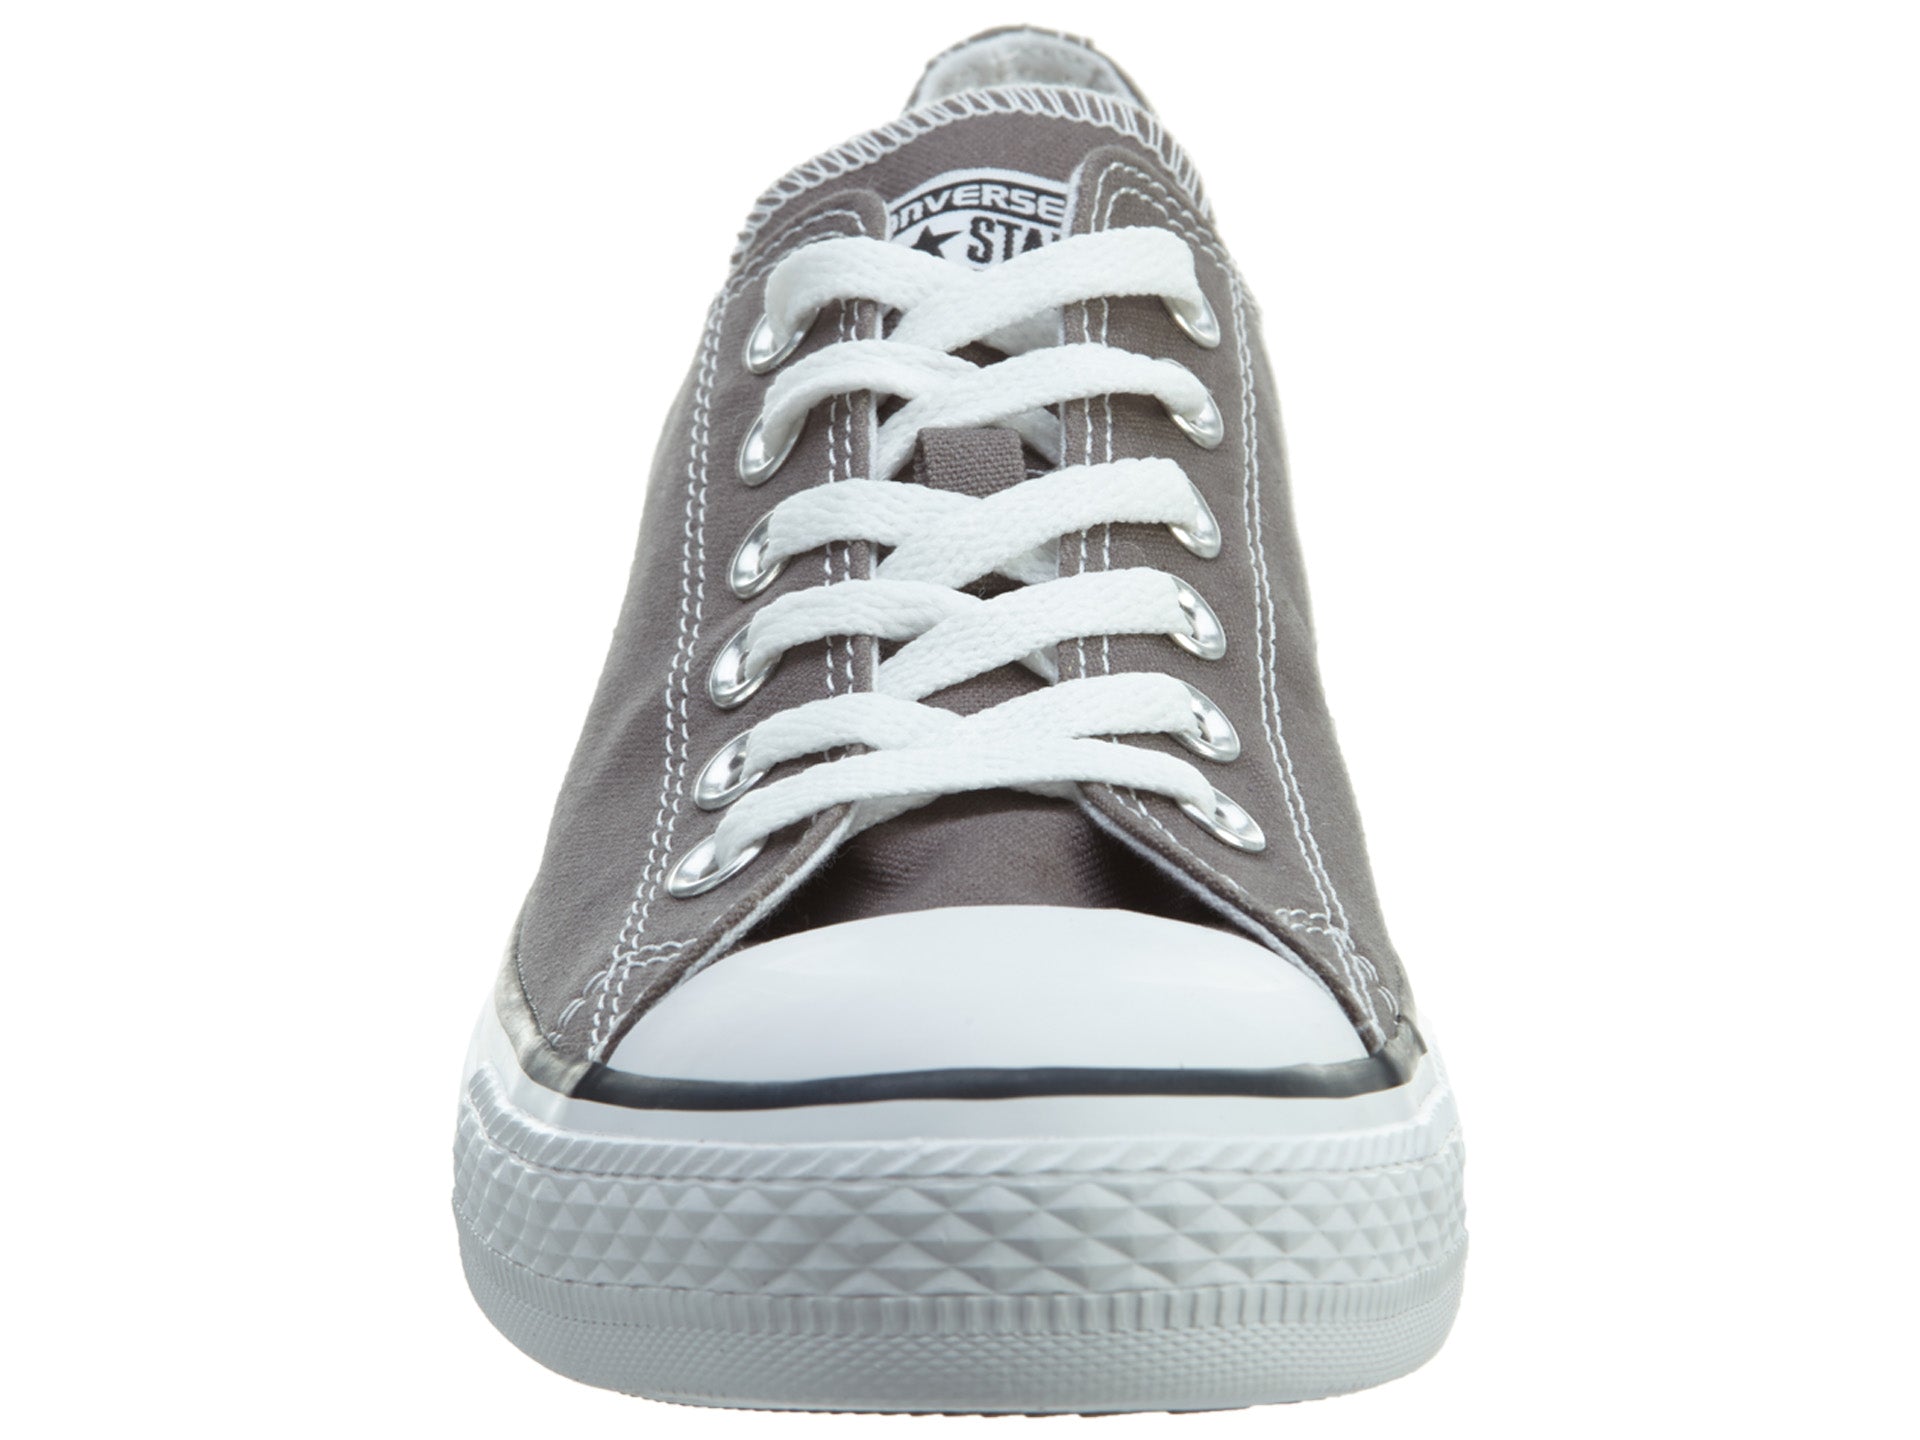 Converse Chuck Taylor All Stars Ox Shoe - Charcoal